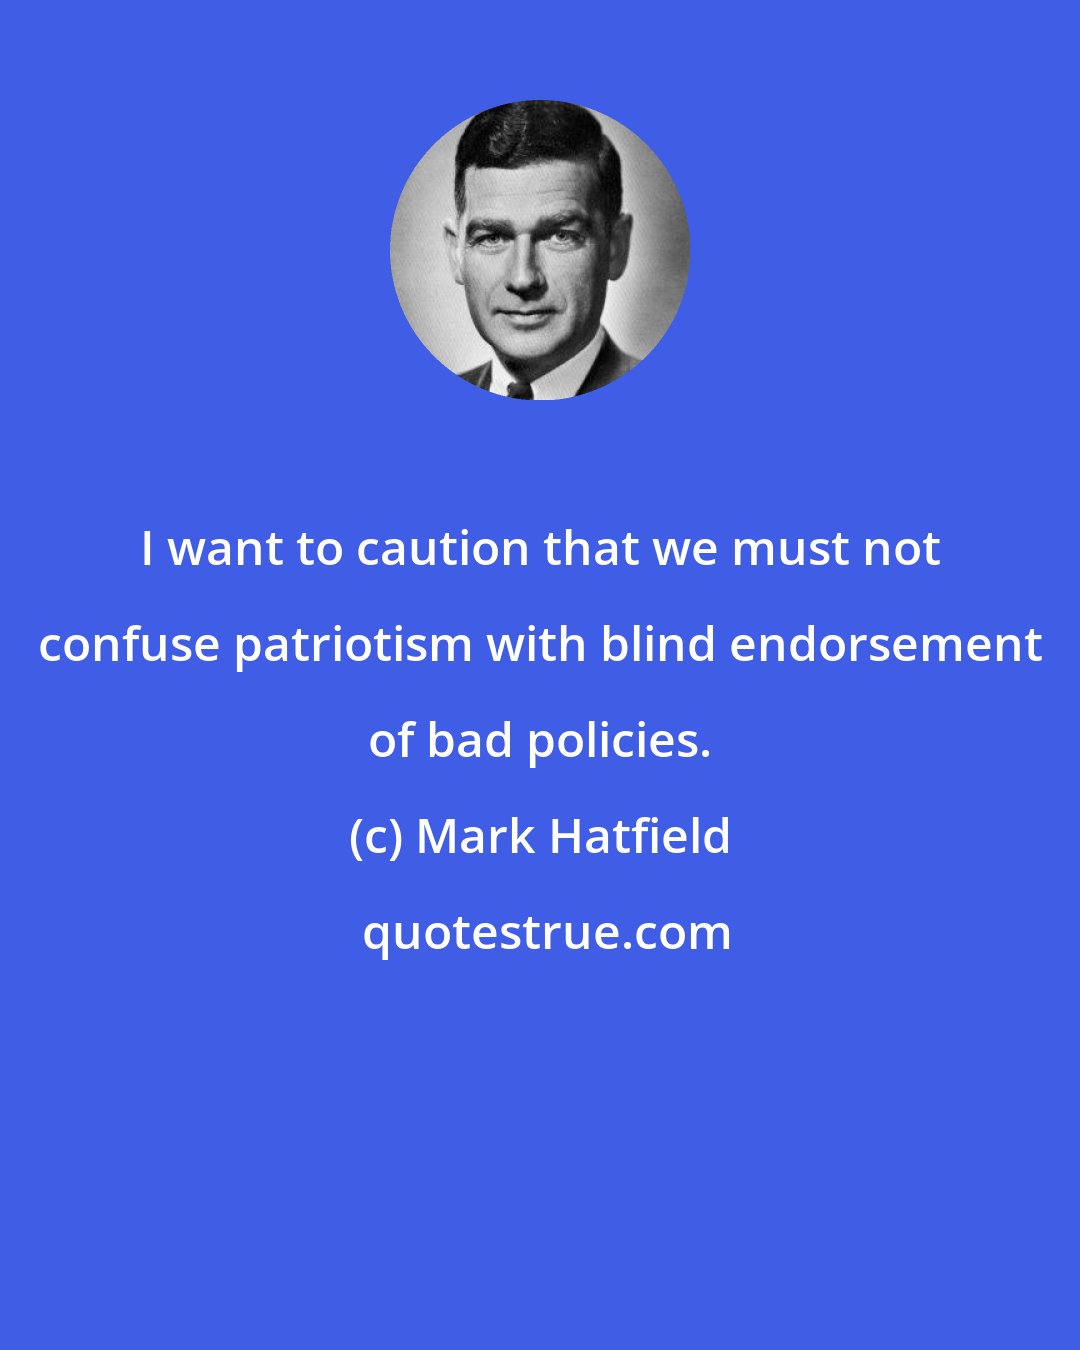 Mark Hatfield: I want to caution that we must not confuse patriotism with blind endorsement of bad policies.